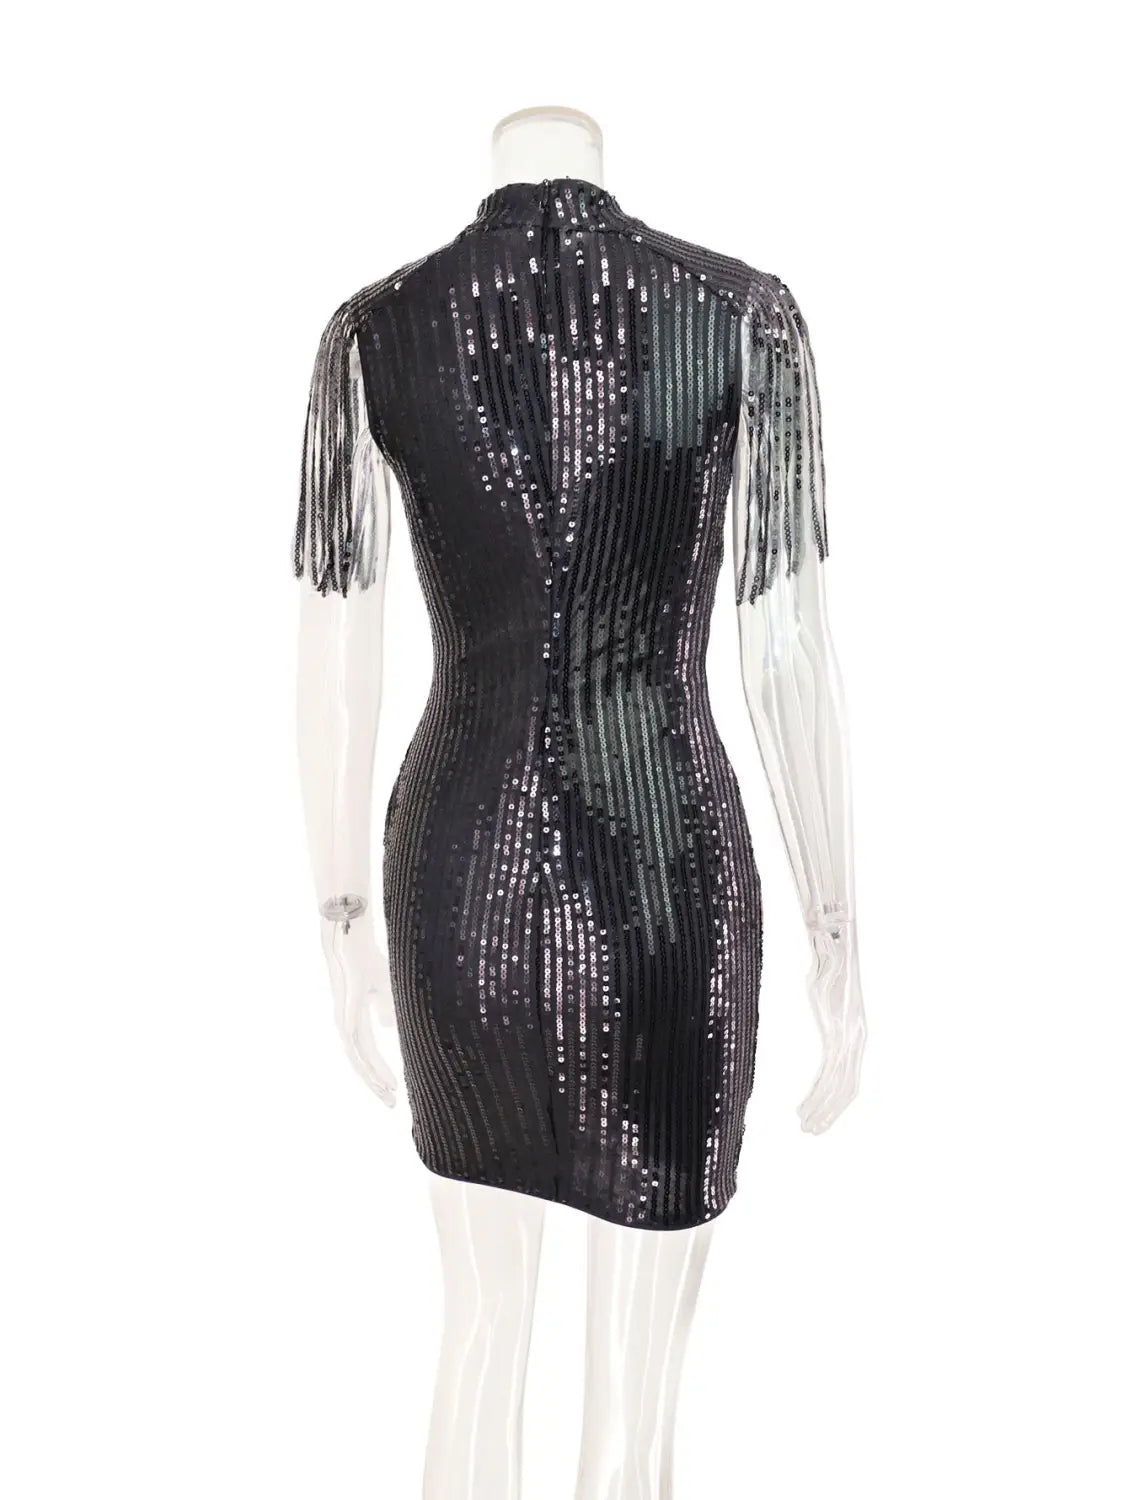 Glam Sequin Bodycon Dress - Sexy Elegance With Intricate Lace Details